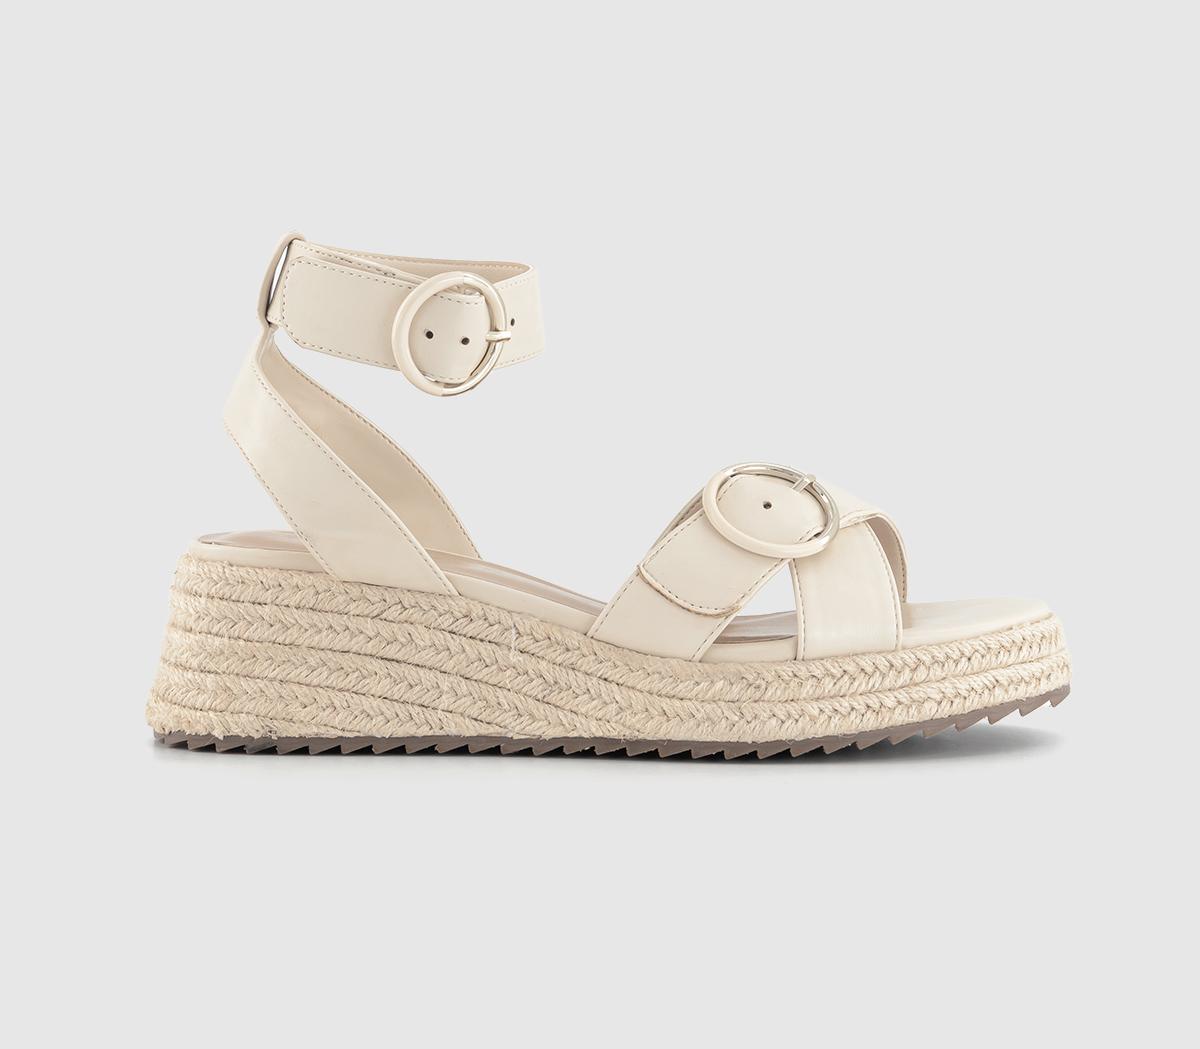 OFFICEMarcella Double Buckle Espadrille WedgesOff White